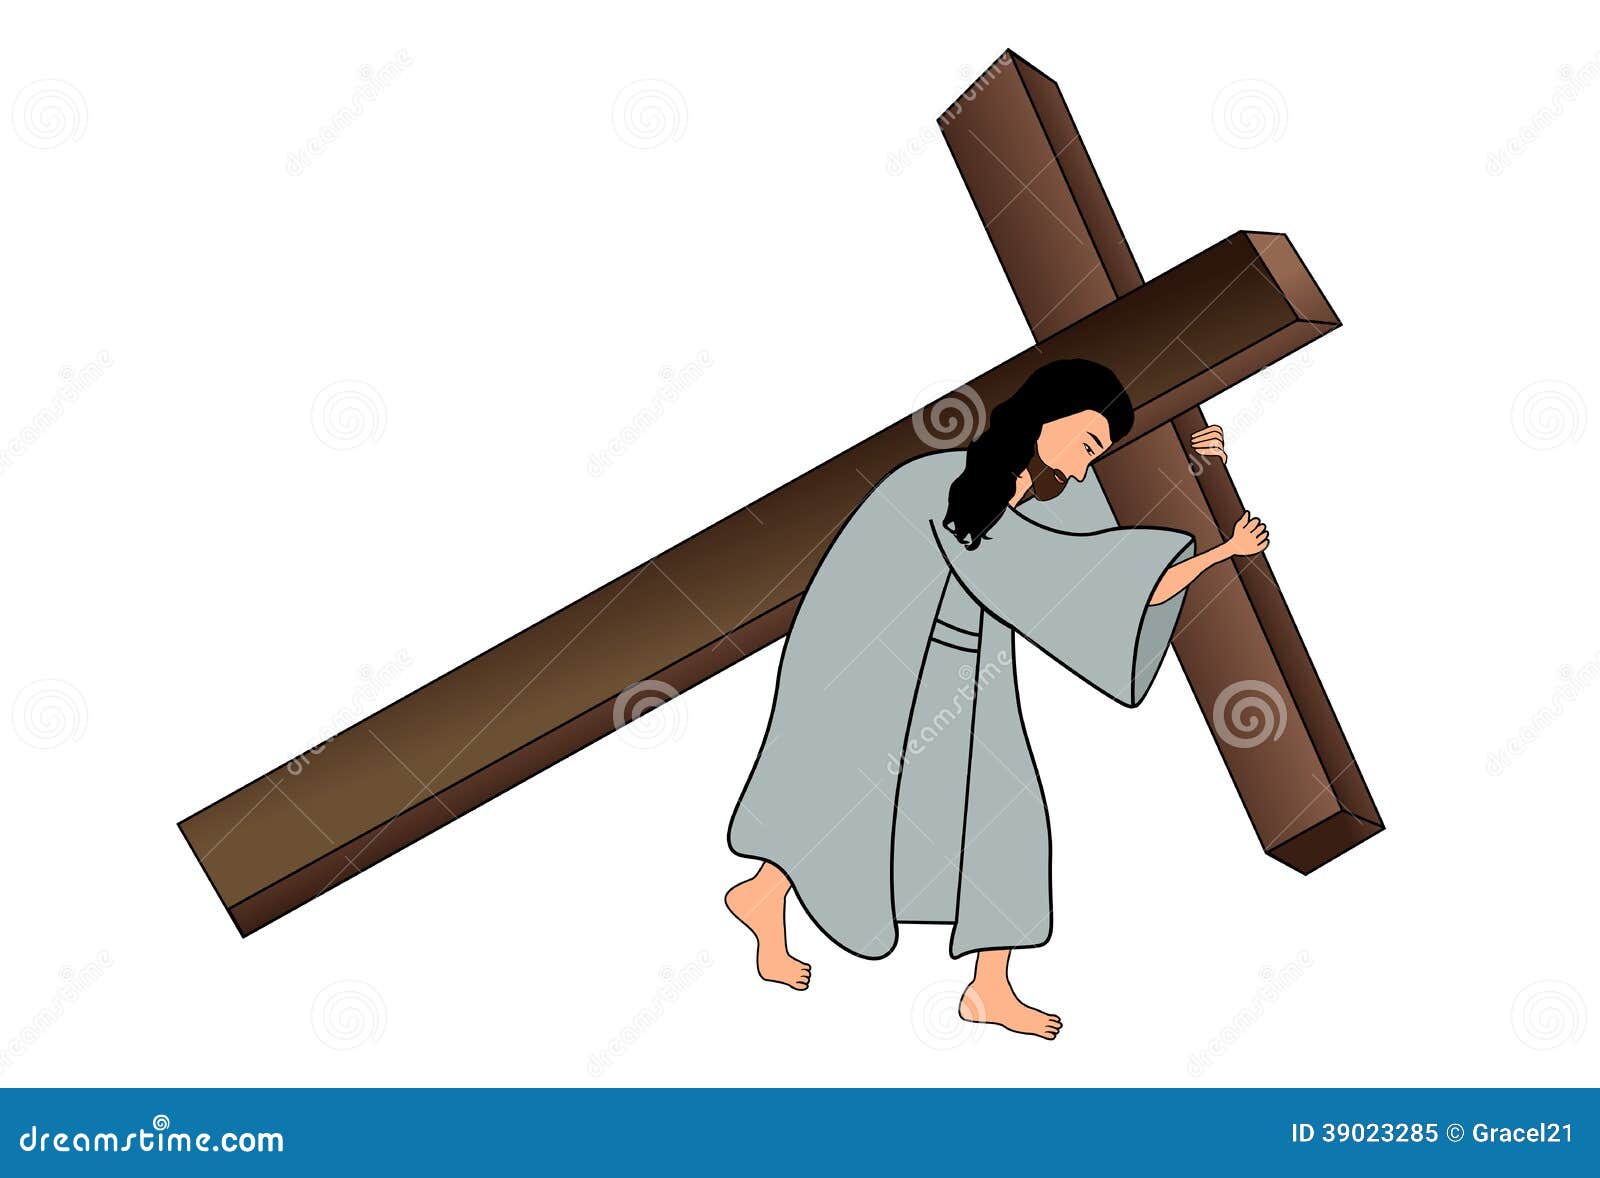 clipart jesus carrying cross - photo #20